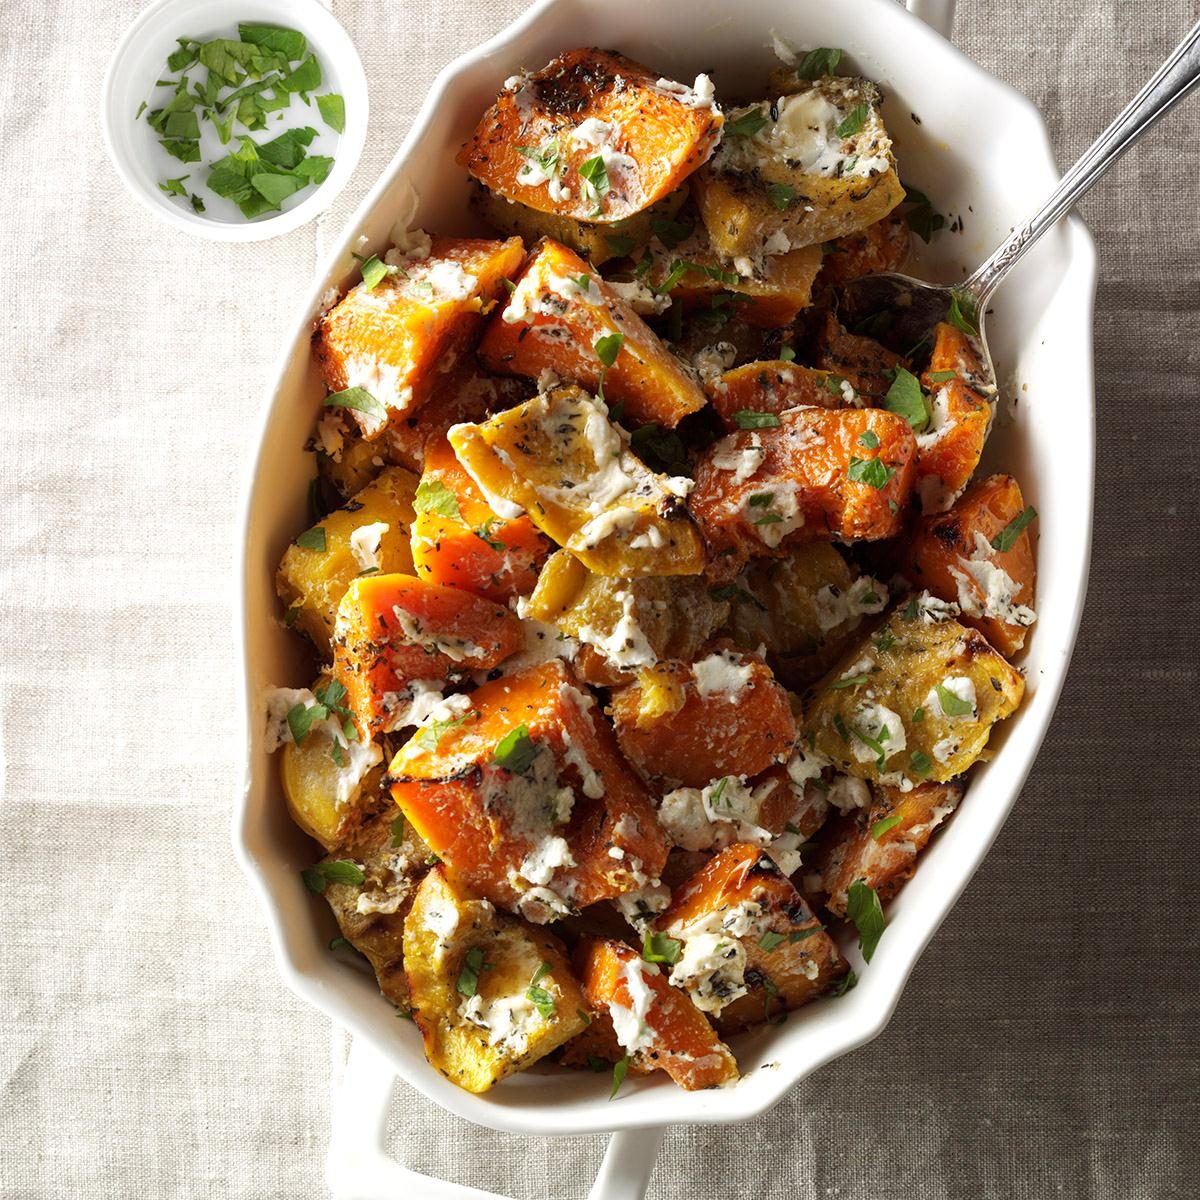 Roasted Herbed Squash with Goat Cheese